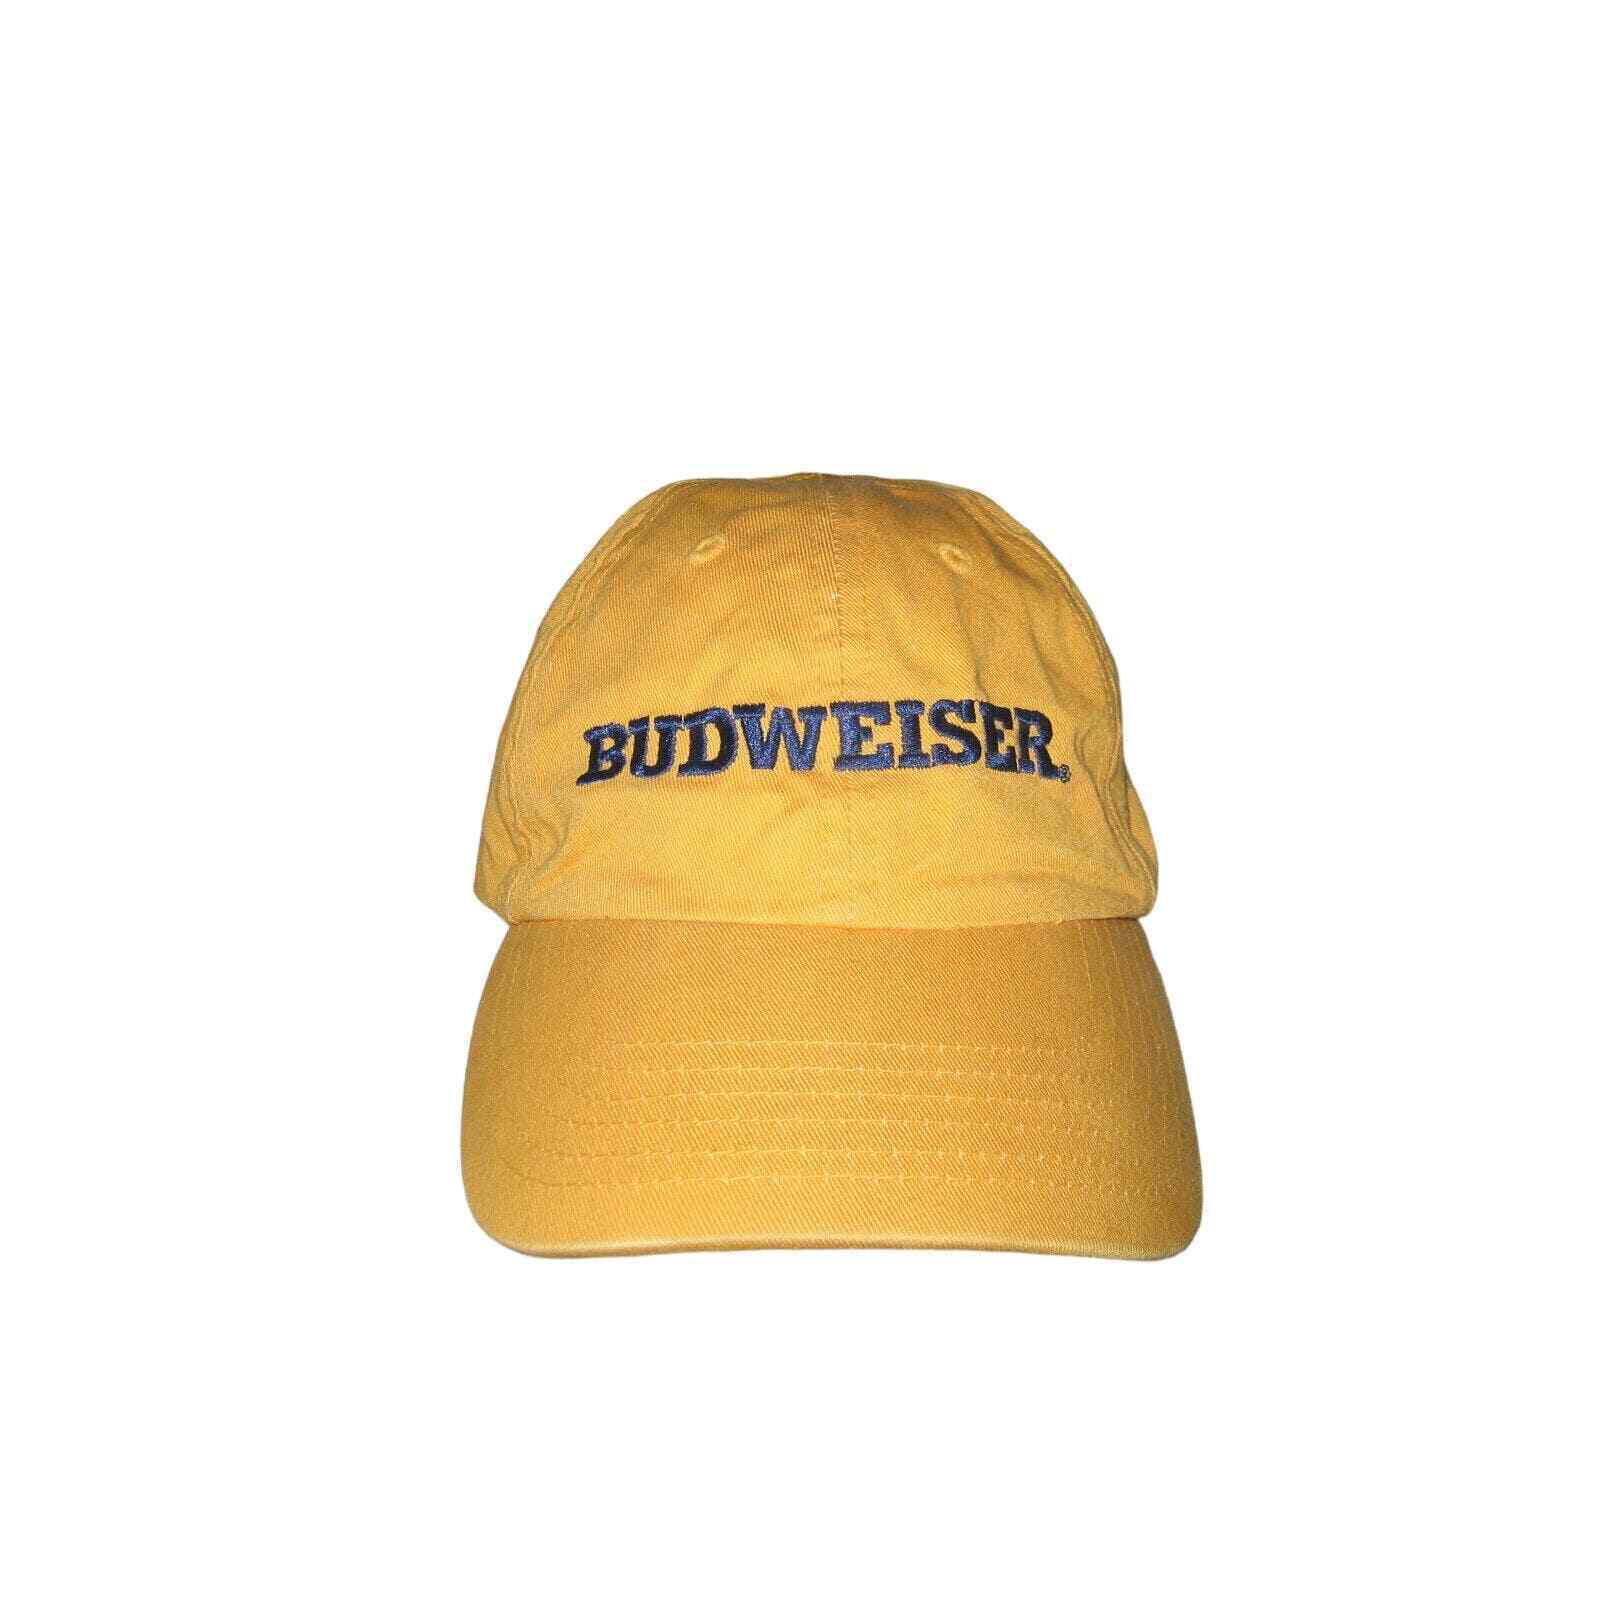 VTG Bud King of Beers Budweiser Baseball Hat Beer Adult One Size Yellow Spellout